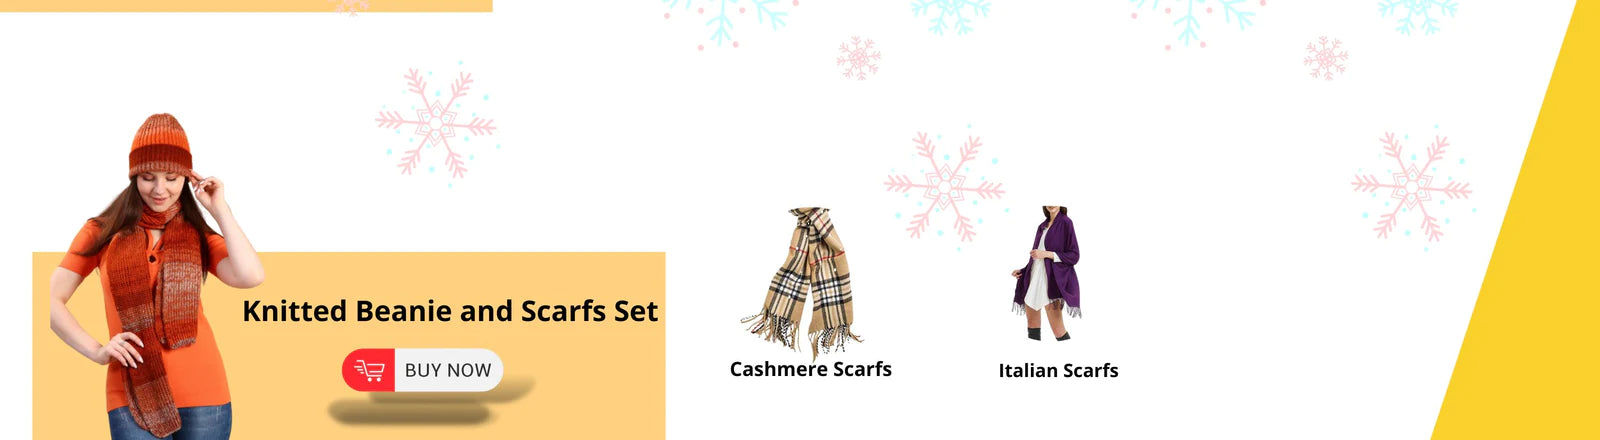 Why You Should Buy Knitted Beanie & Scarf Set Online?